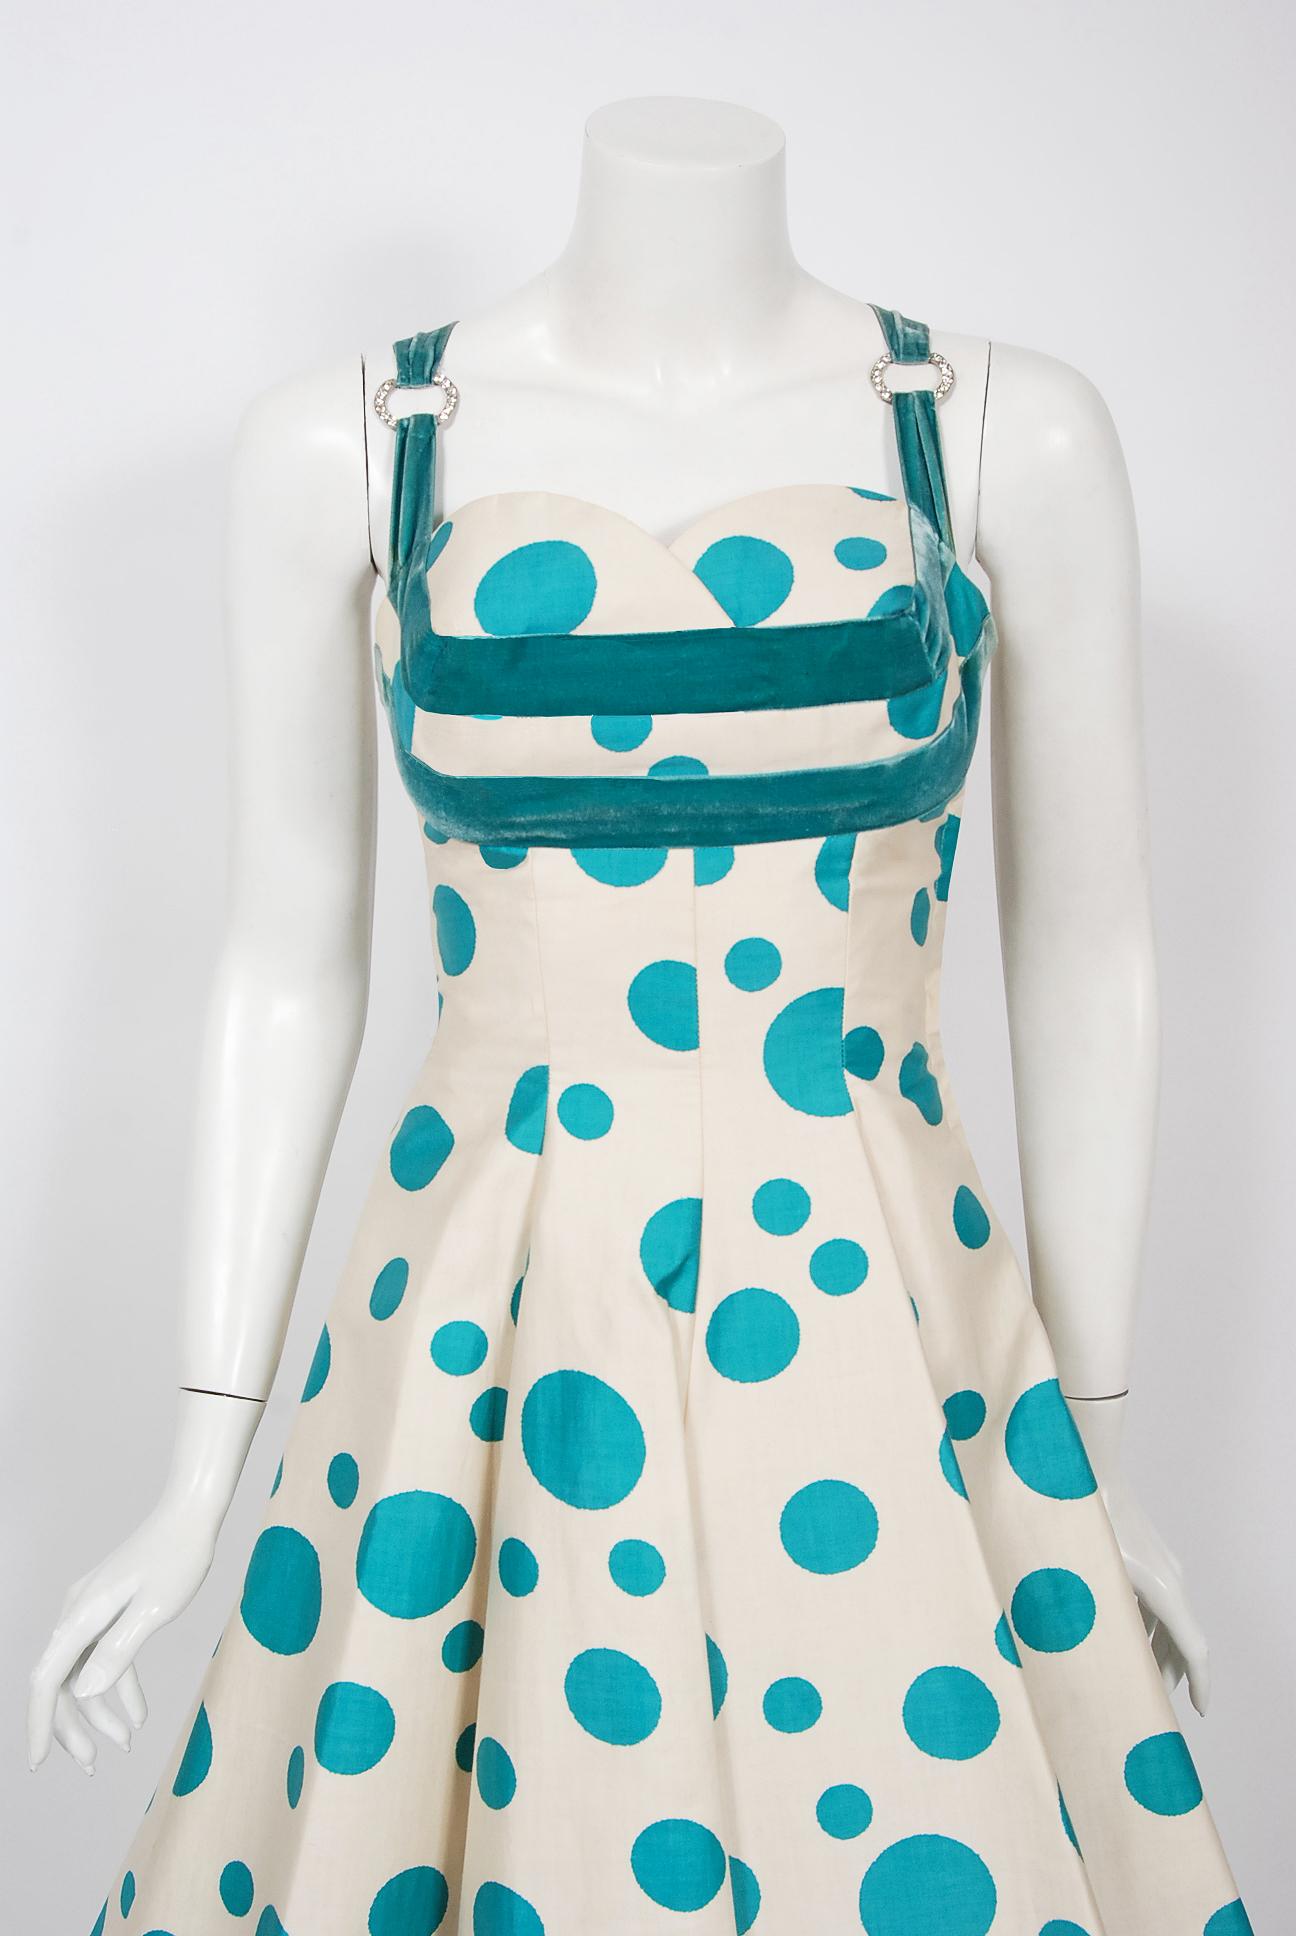 This gorgeous mid-century dress by 